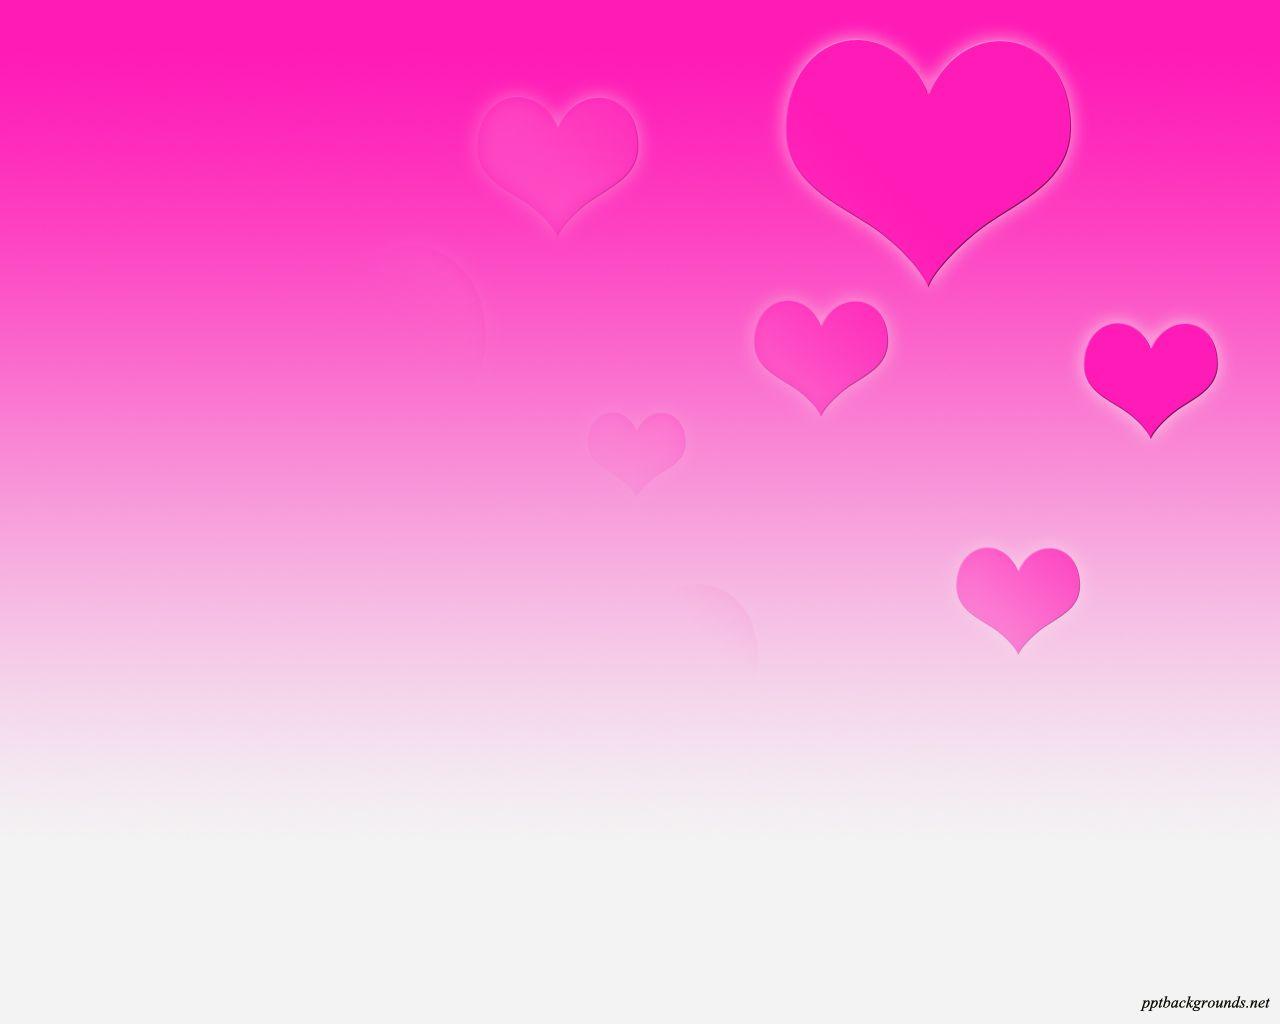 Free Pink Background Heart Patterns Background For PowerPoint